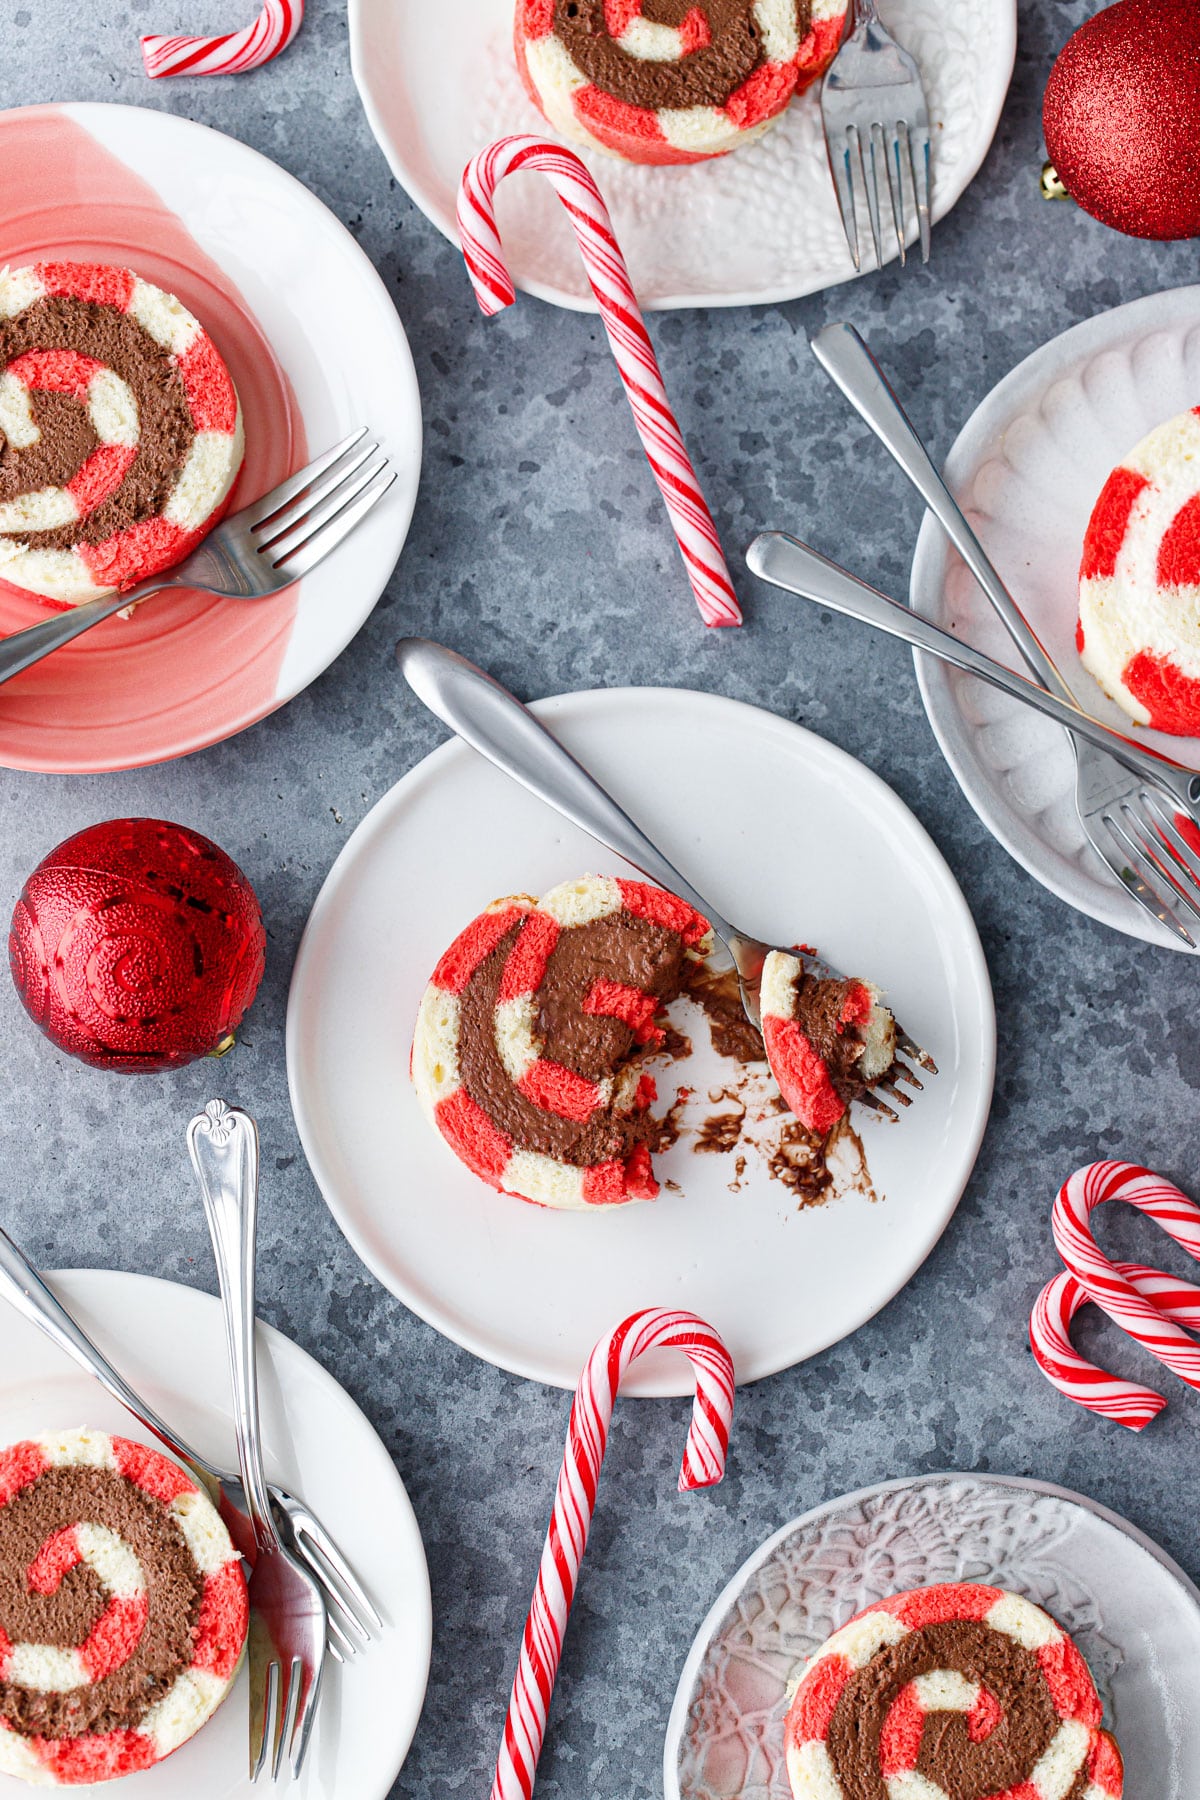 Birds-eye view of multiple plates with slices of Peppermint Swiss Cake Rolls with swirls of chocolate whipped cream filling, one slice smashed a bit with a fork, and a few candy canes and red ornaments scattered around.